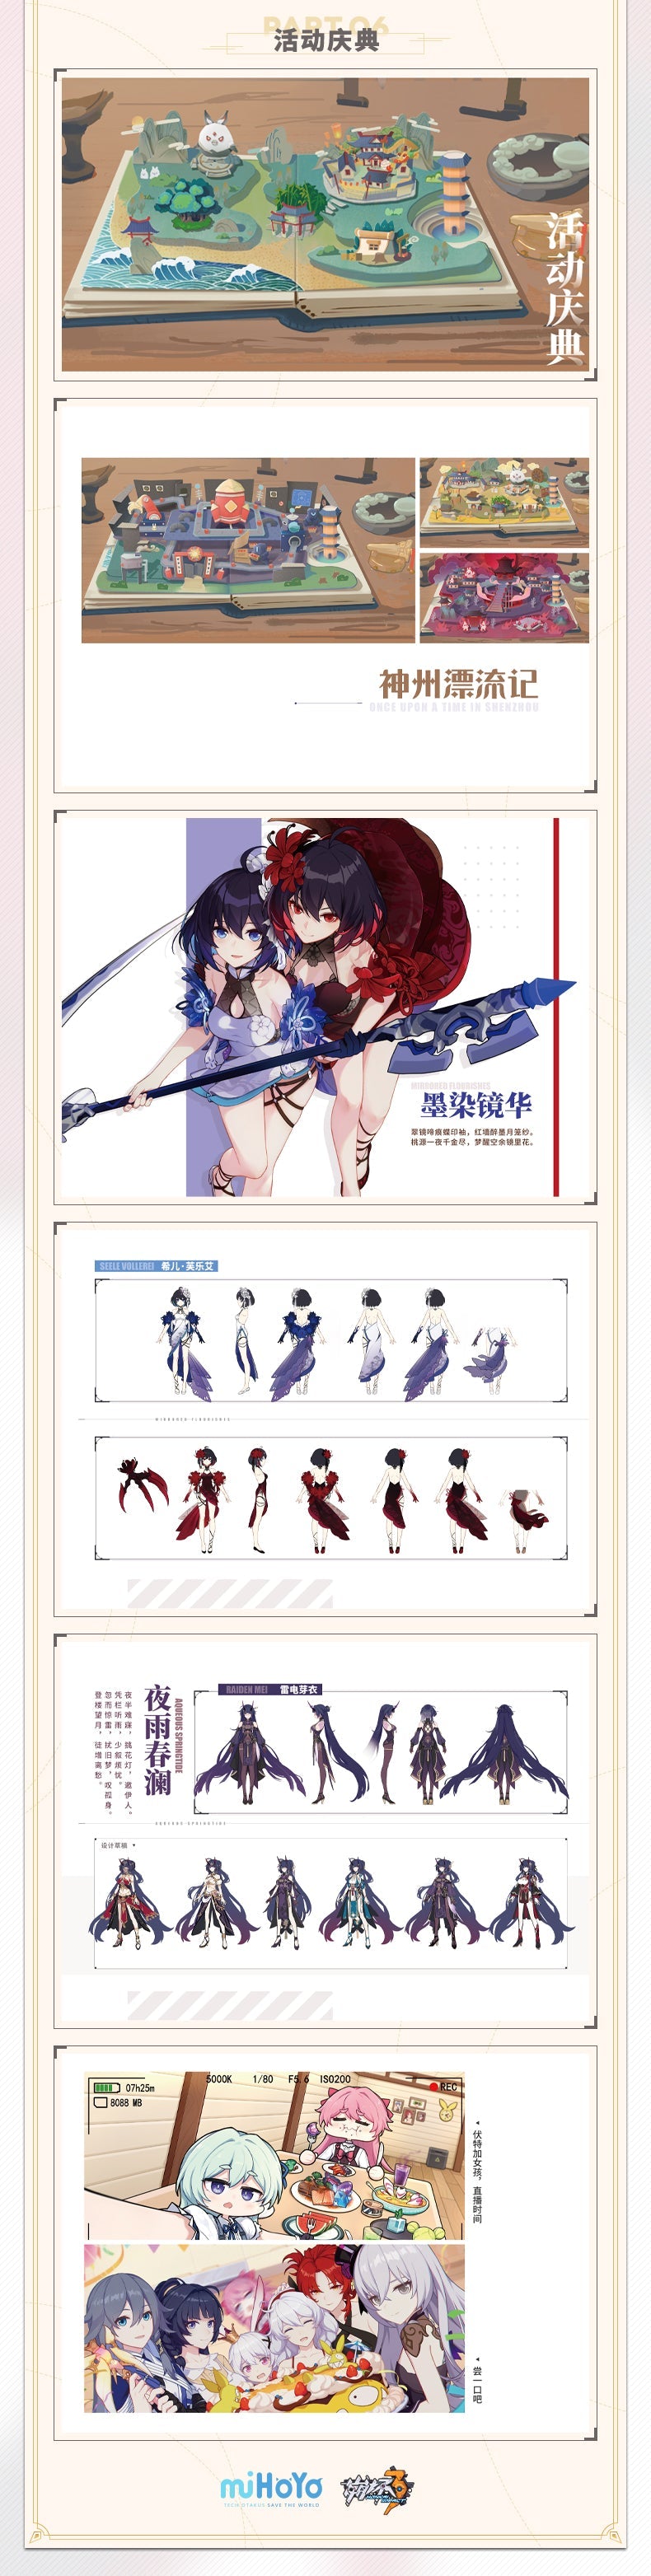 Honkai Impact - Original Art Book Collection - Vol 1 - The Journey of the Meteor